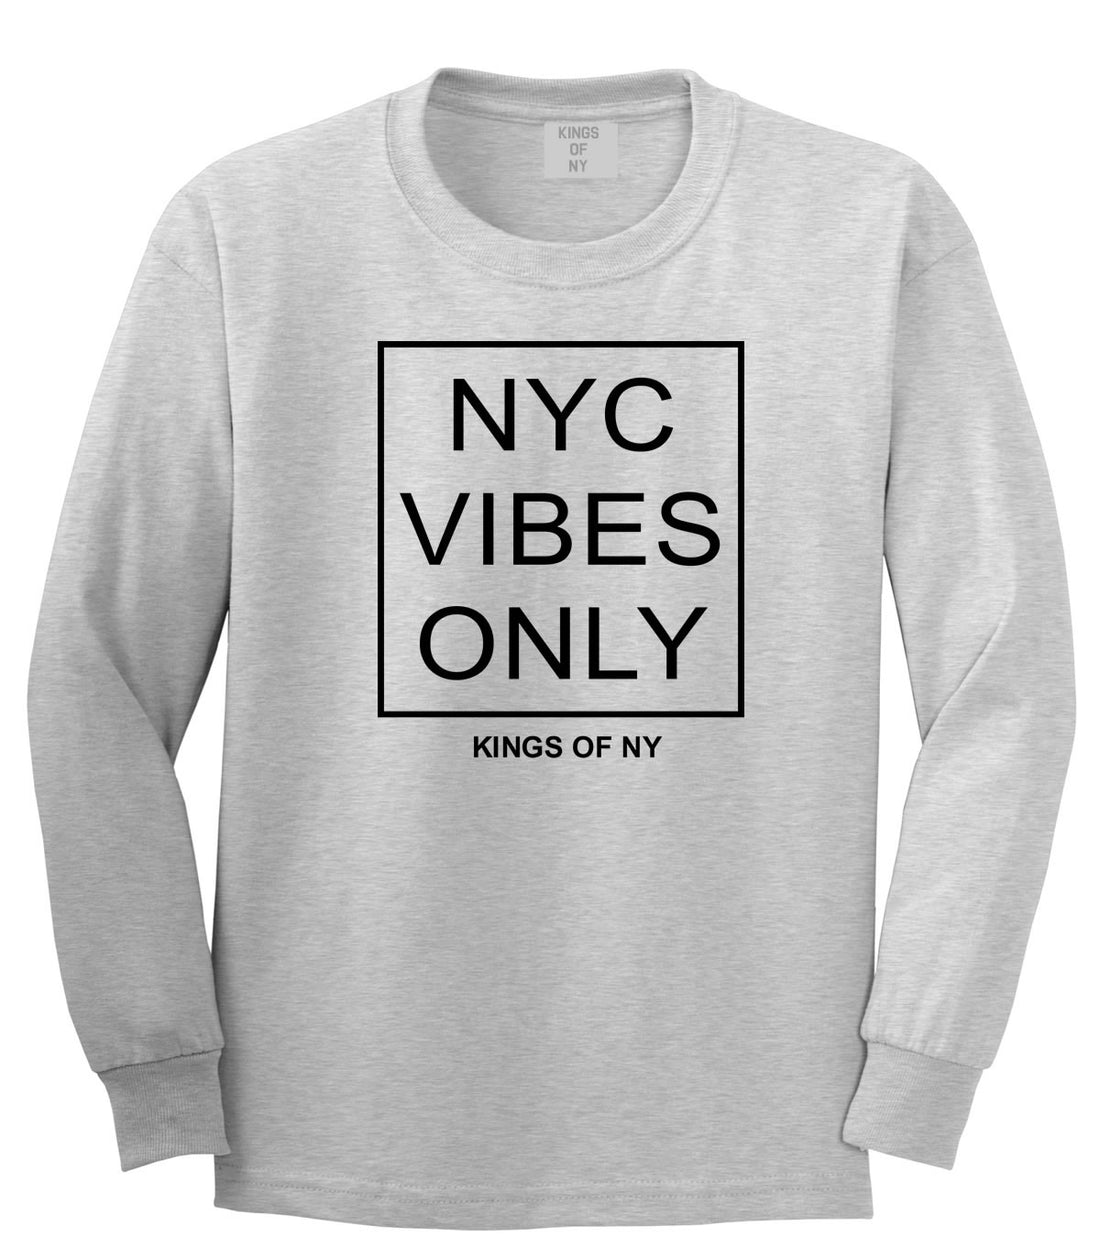 NYC Vibes Only Good Long Sleeve T-Shirt